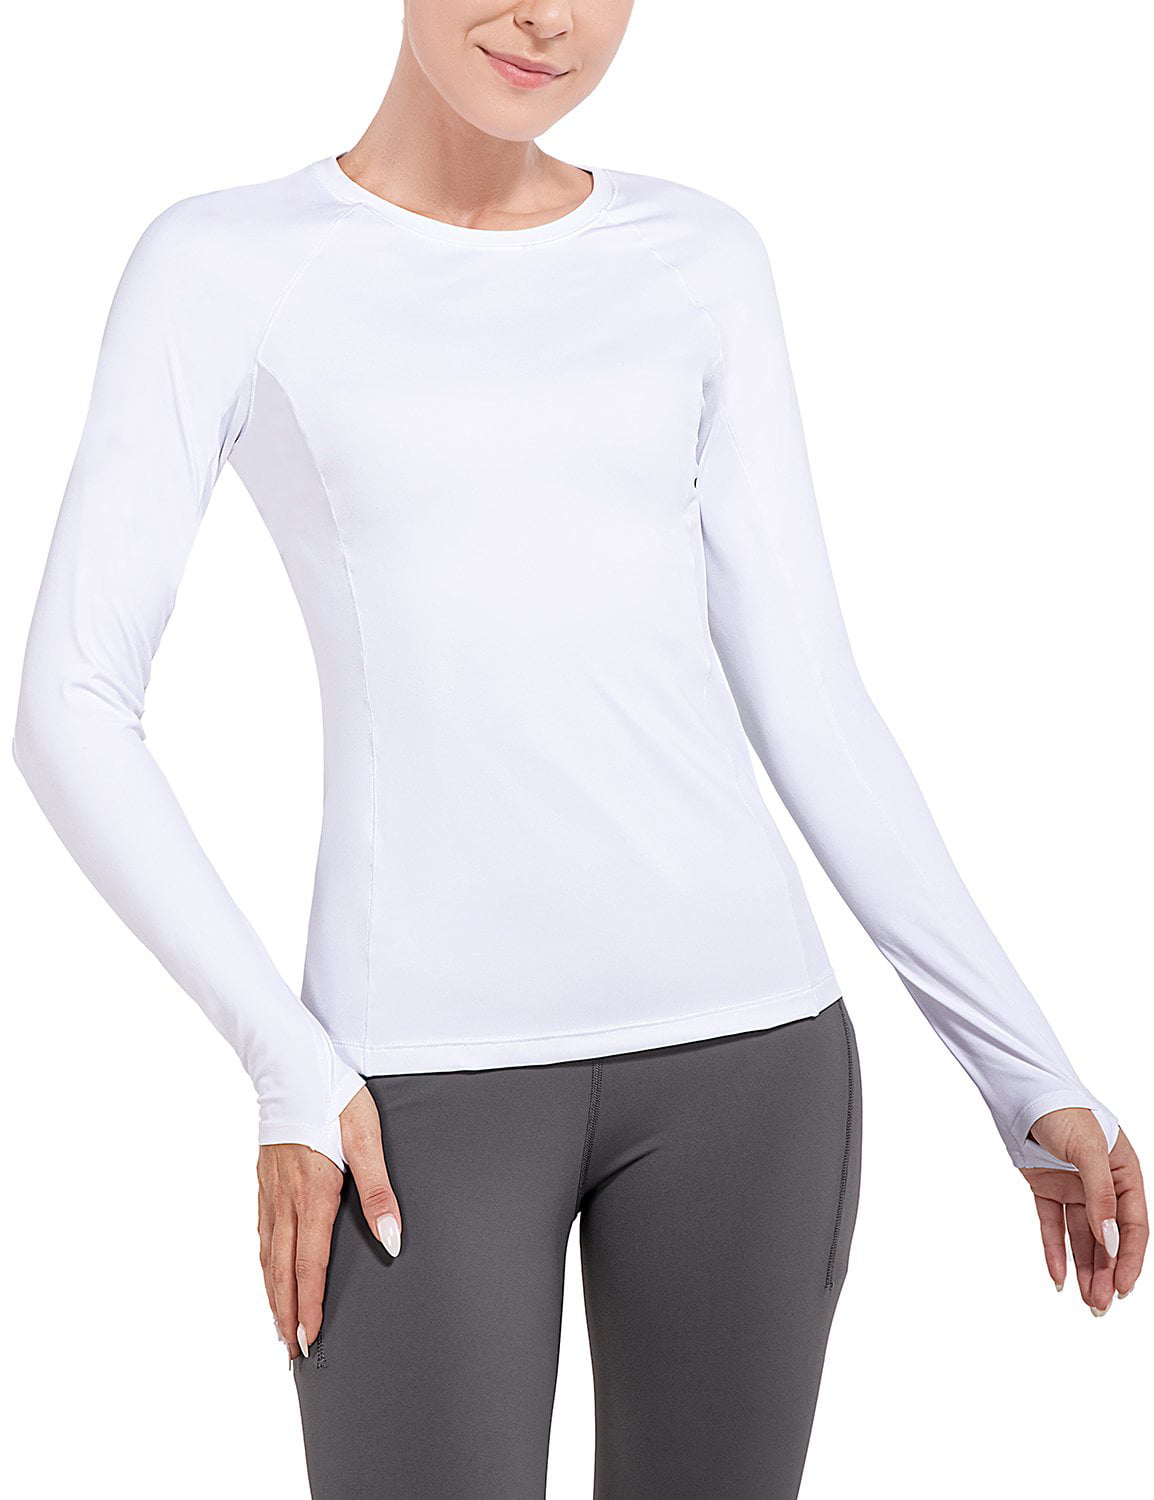 Women's Compression Thumb Holes T-Shirts Long Sleeve BaseLayer for Yoga Running 